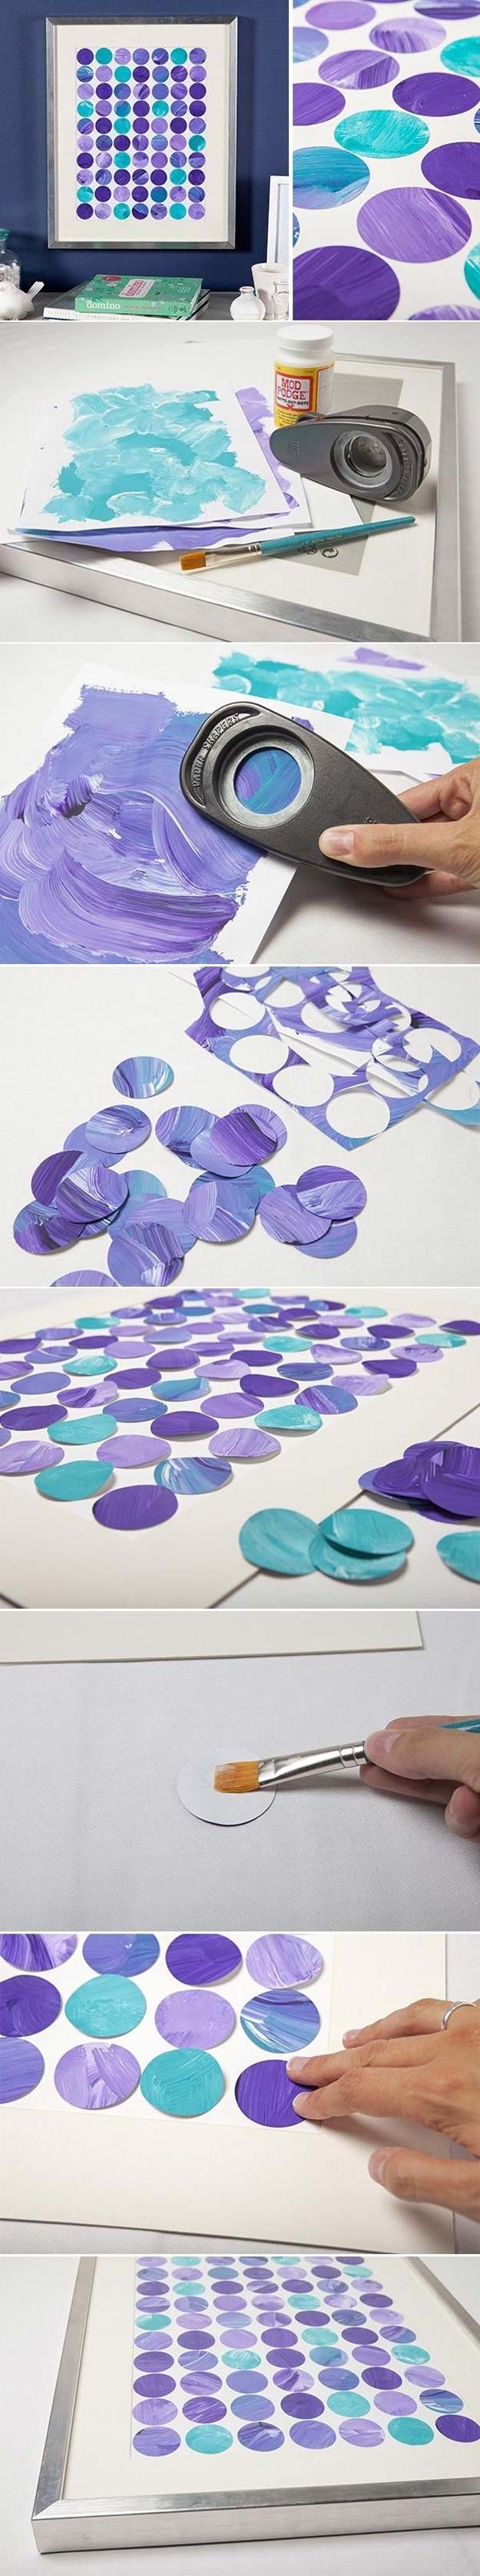 DIY Polka Dot Crafts and Projects - DIY Colorful Wall Artr - Cool Clothes, Room and Home Decor, Wall Art, Mason Jars and Party Ideas, Canvas, Fabric and Paint Project Tutorials - Fun Craft Ideas for Teens, Kids and Adults Make Awesome DIY Gifts